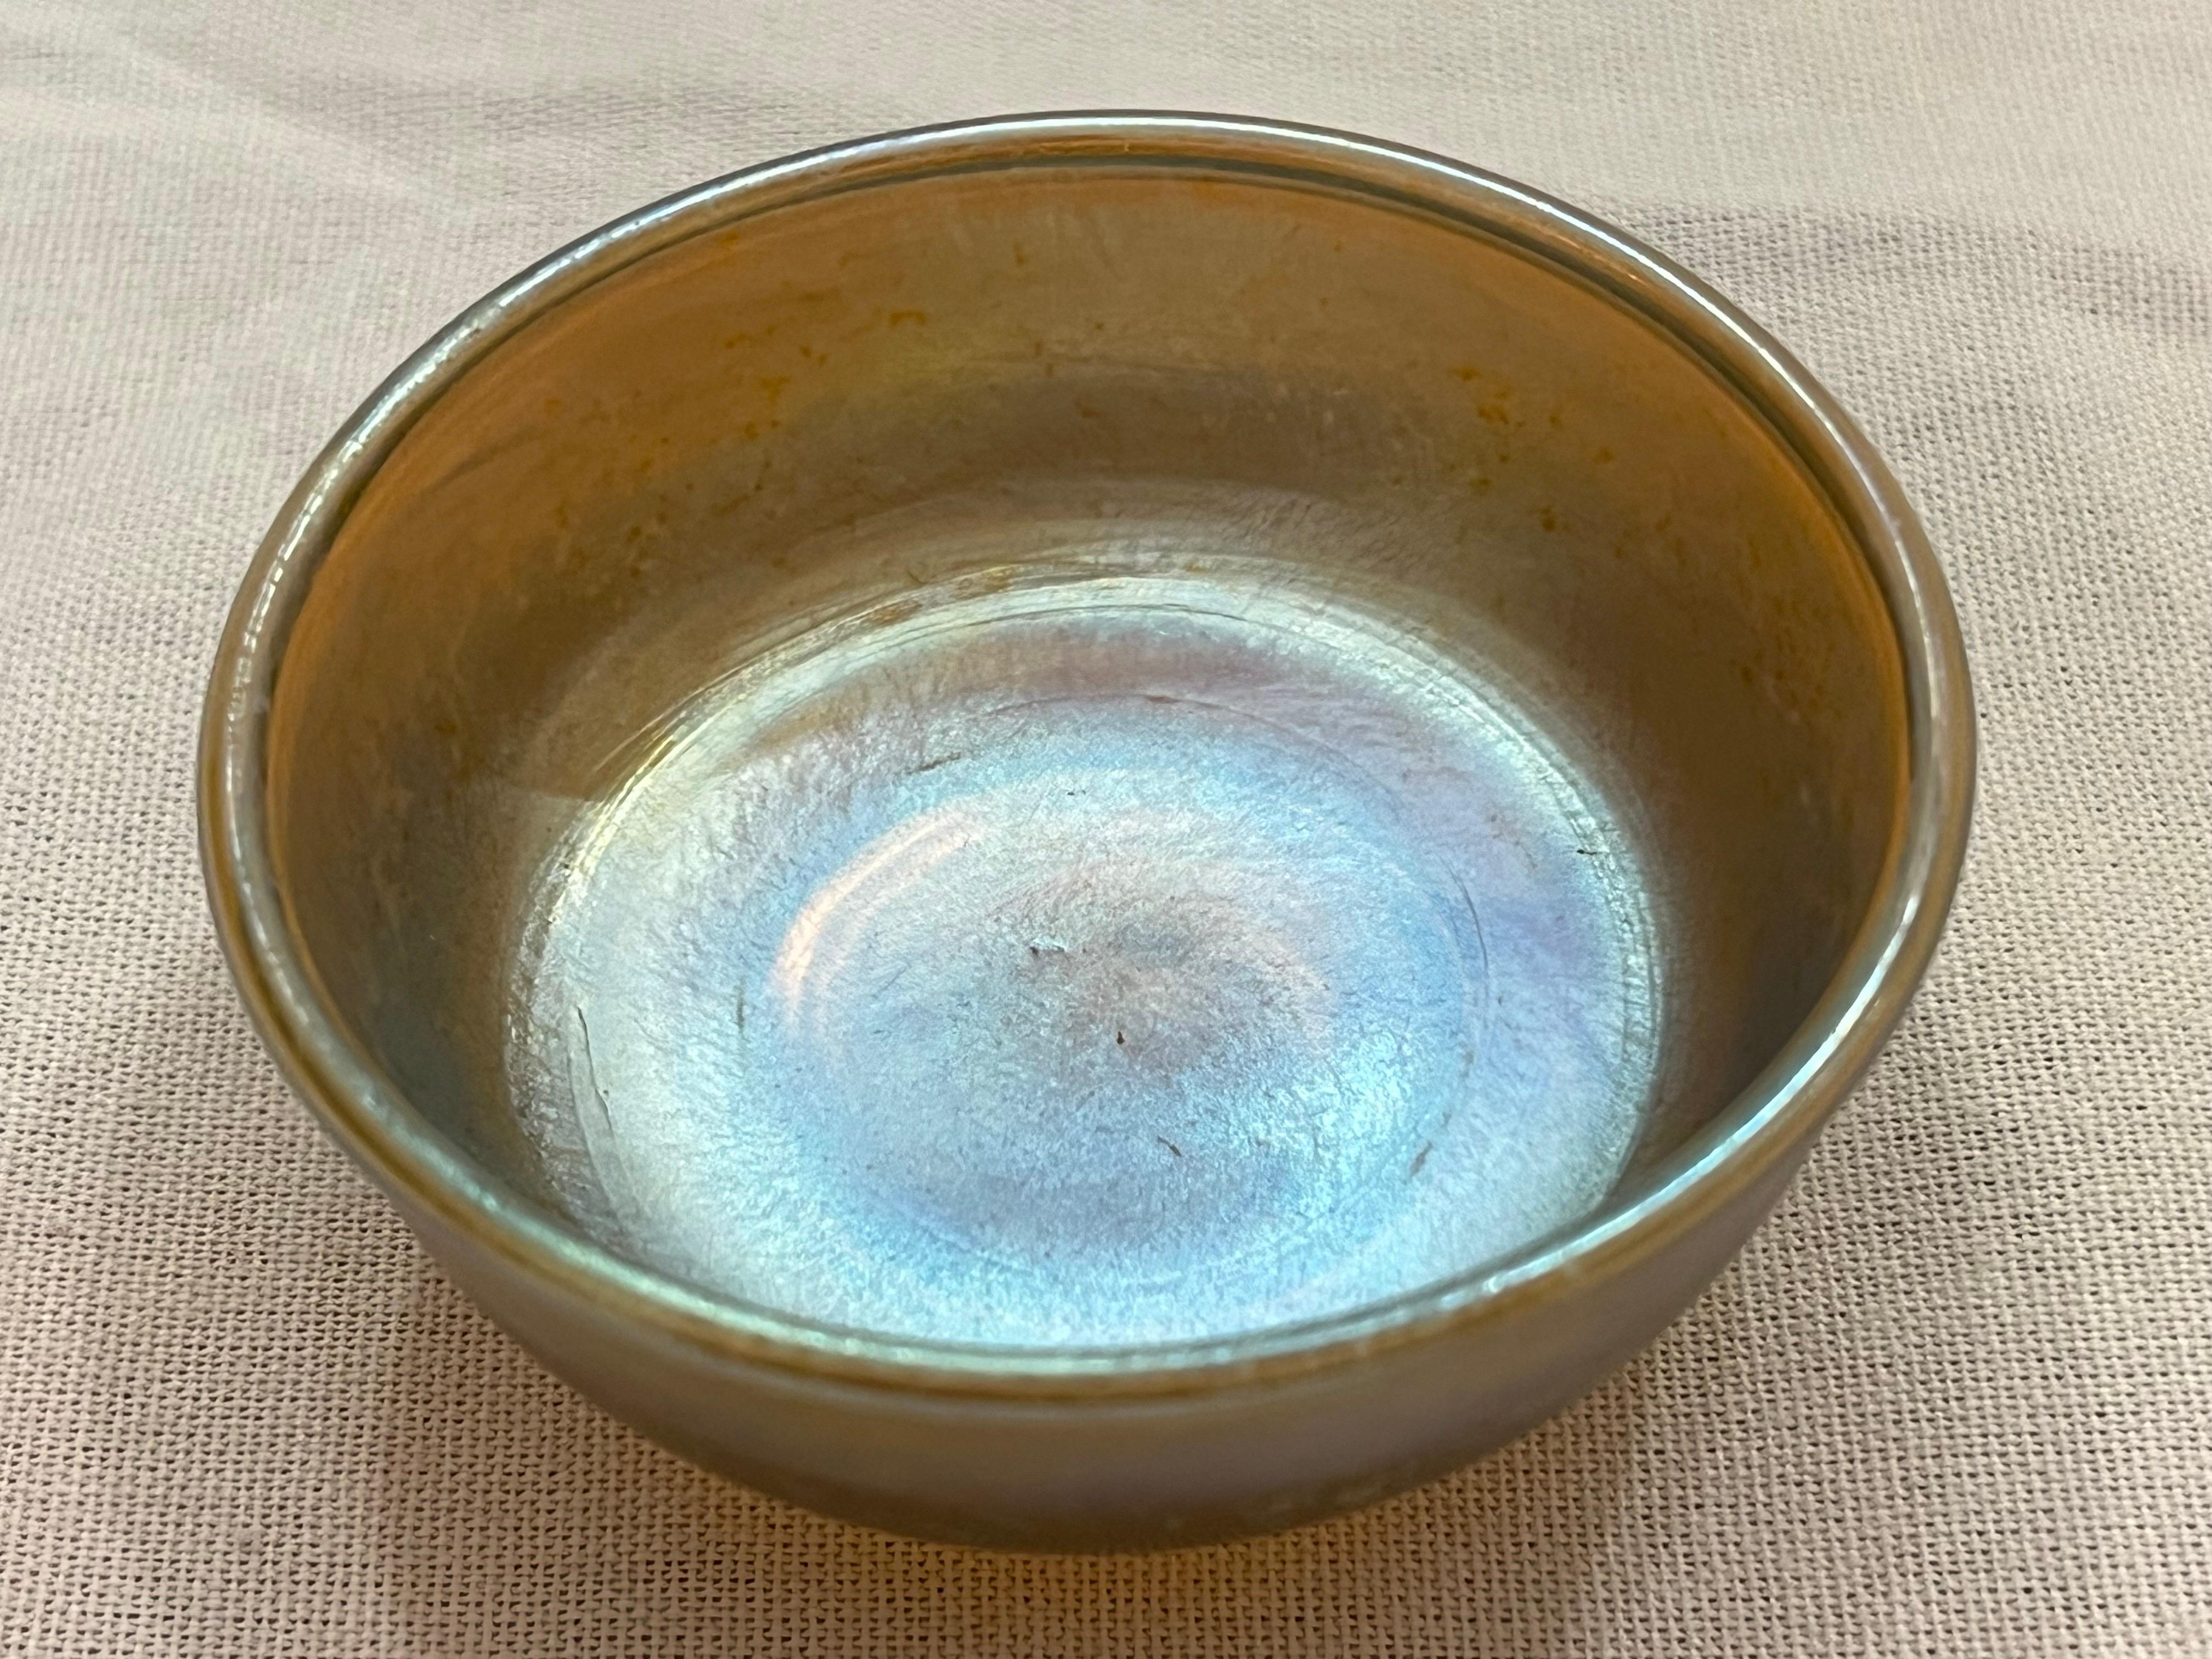 A beautiful favrile glass bowl by Louis Comfort Tiffany. This piece is signed with initials, L.C.T. and marked with the word Favrille. From Wikipedia, 